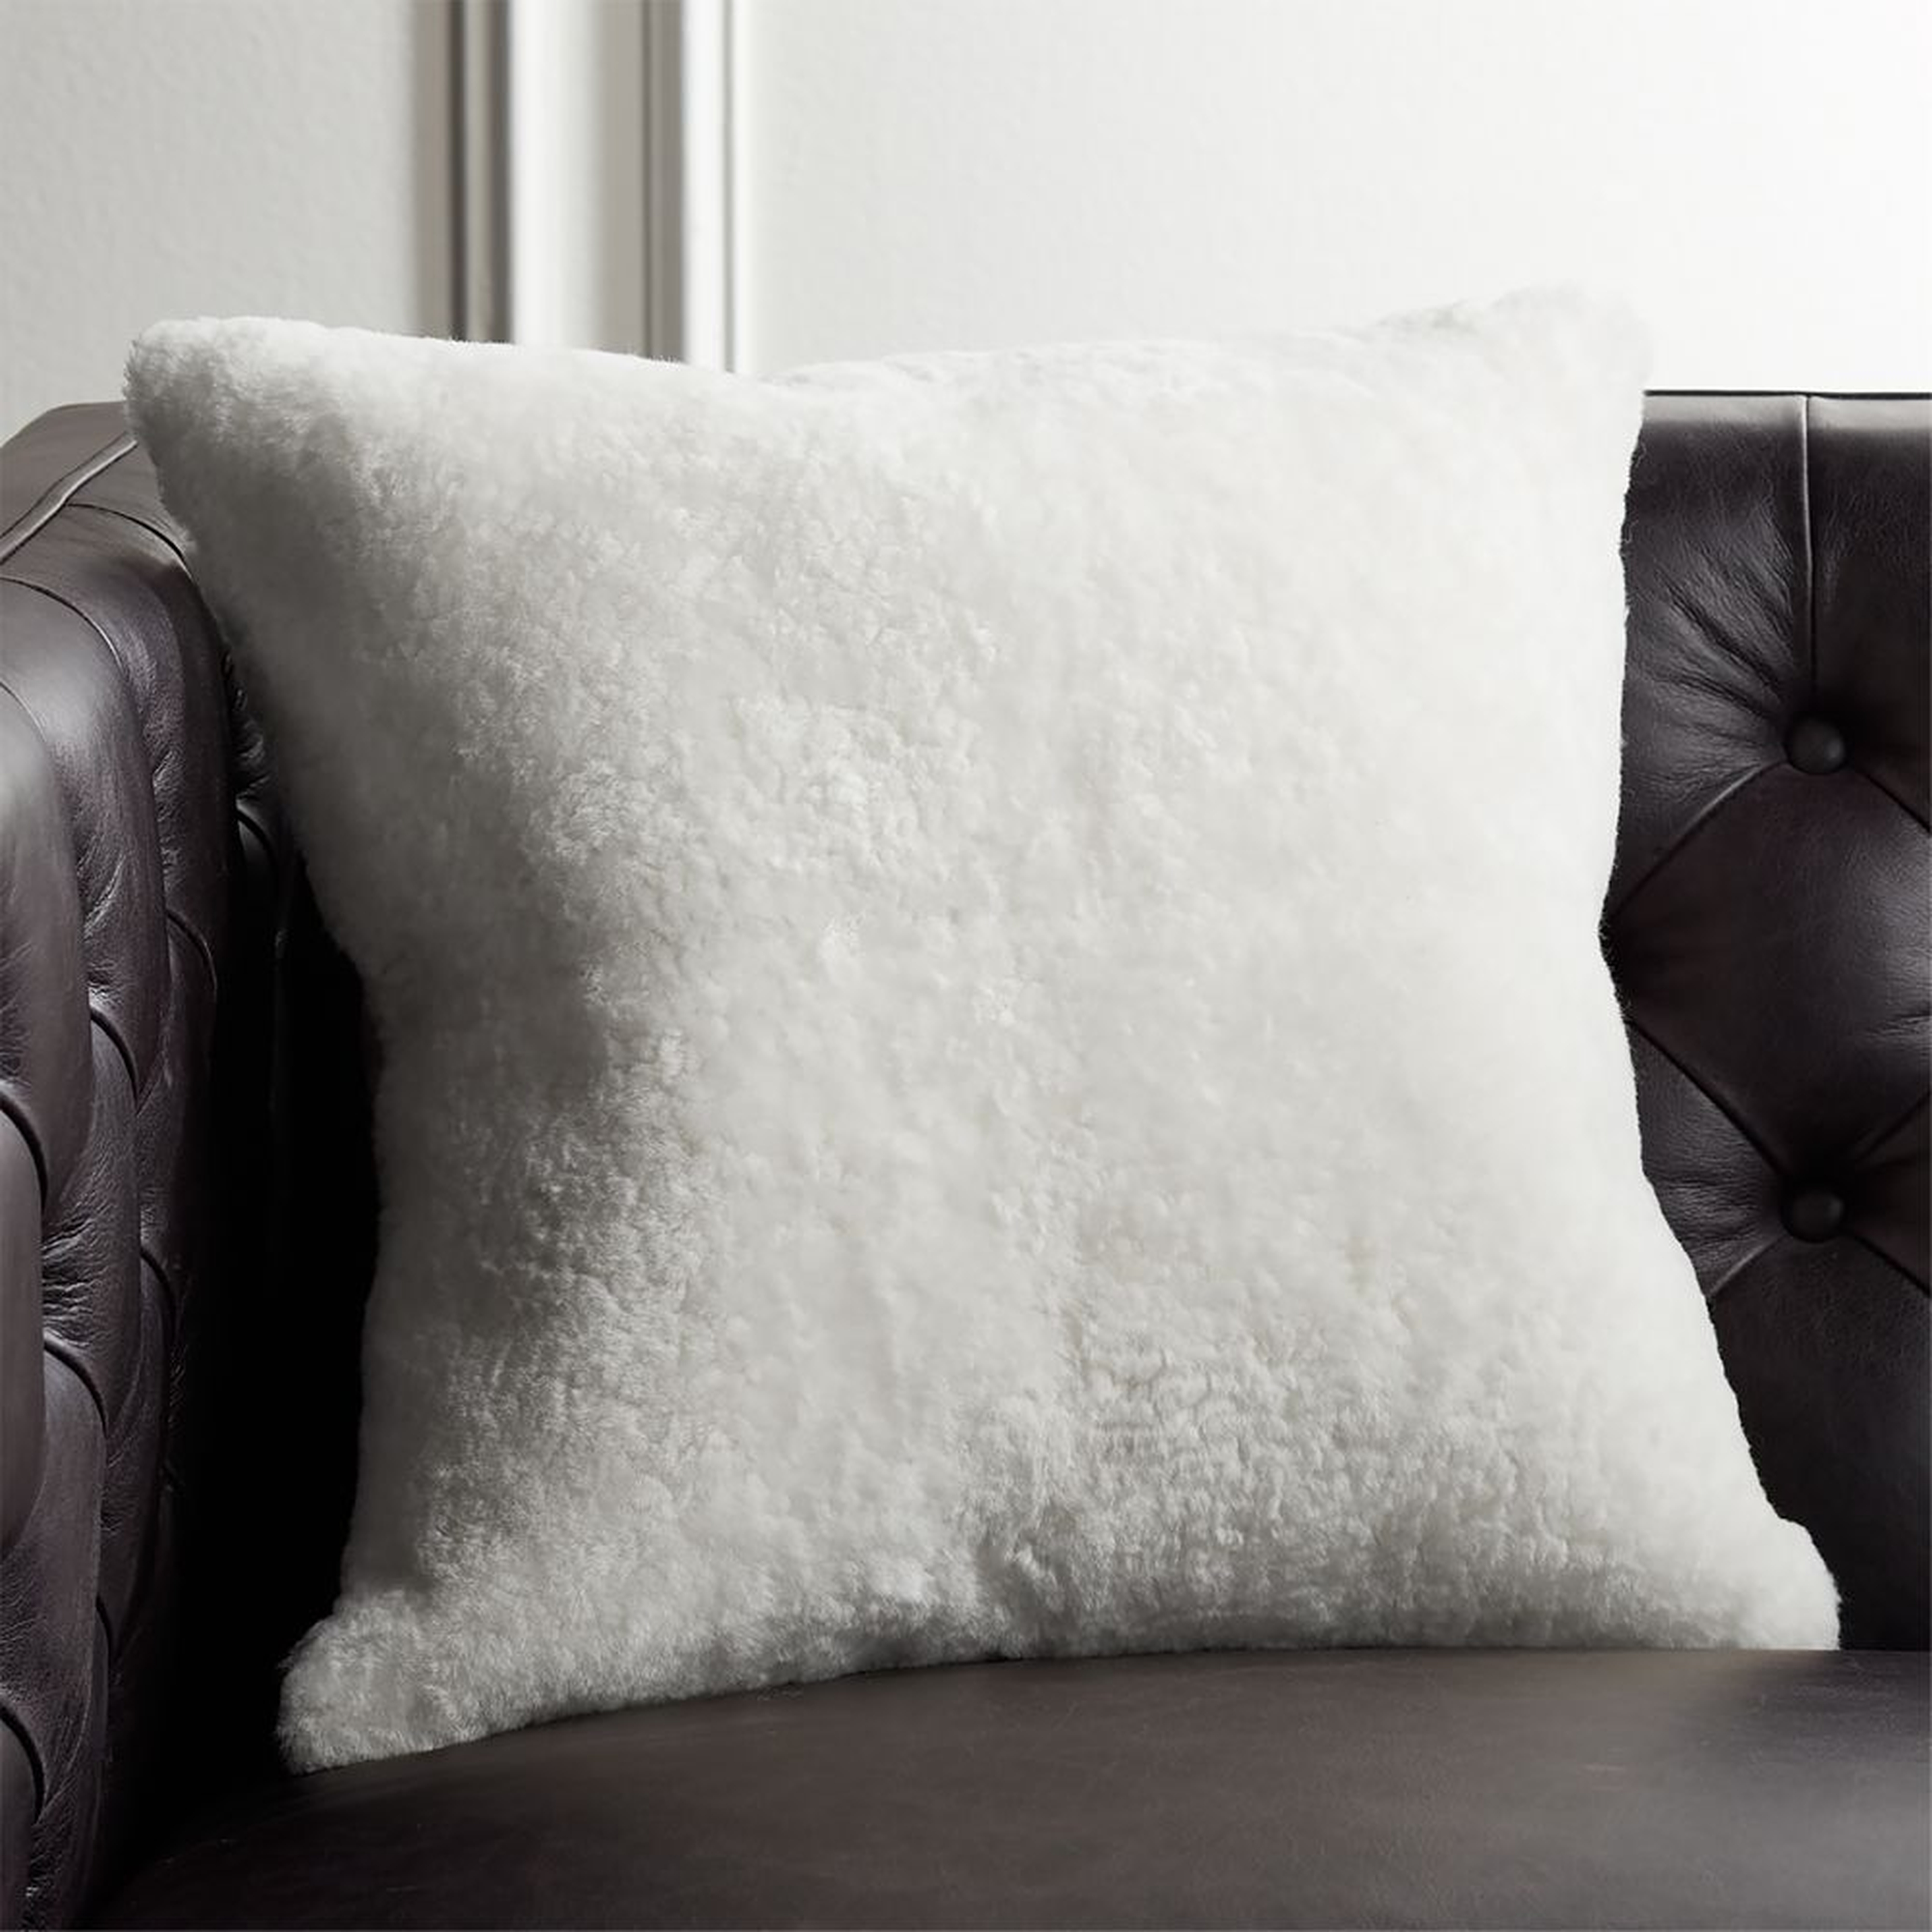 Shorn White Sheepskin Fur Throw Pillow with Feather-Down Insert 18" - CB2